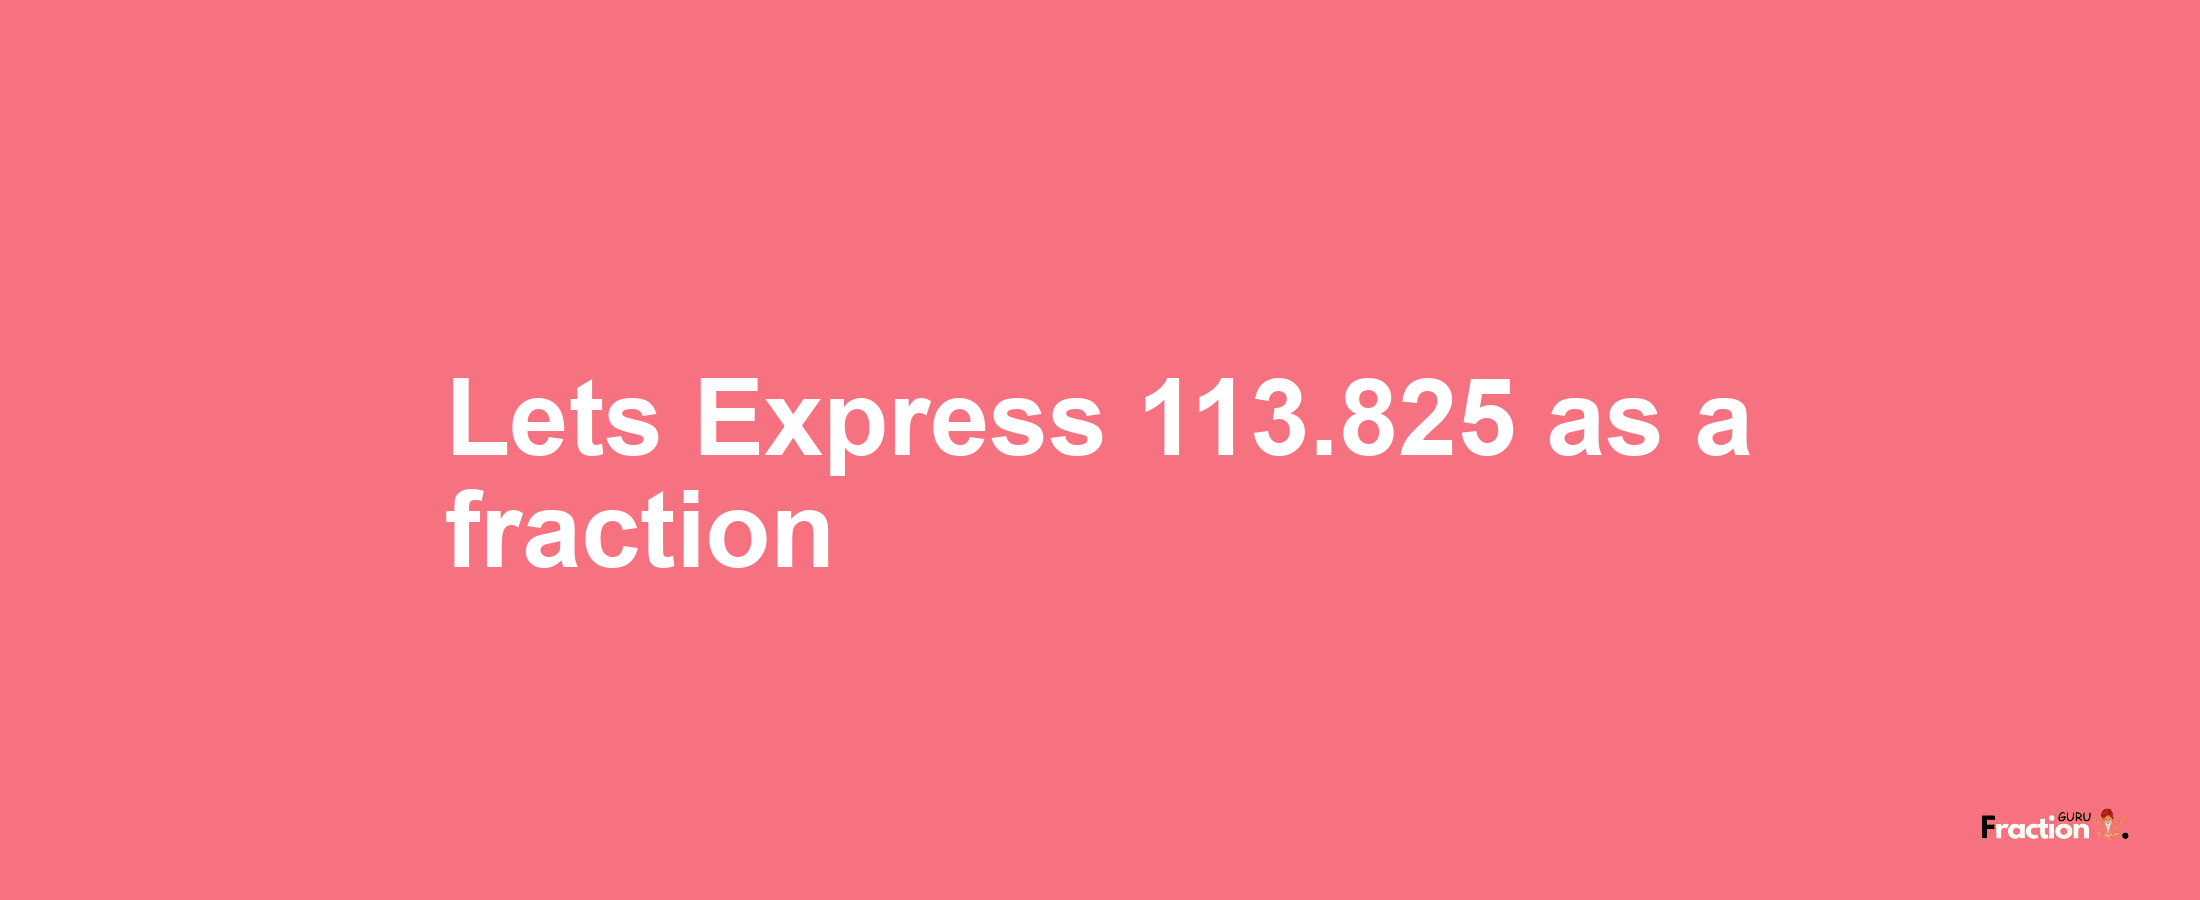 Lets Express 113.825 as afraction